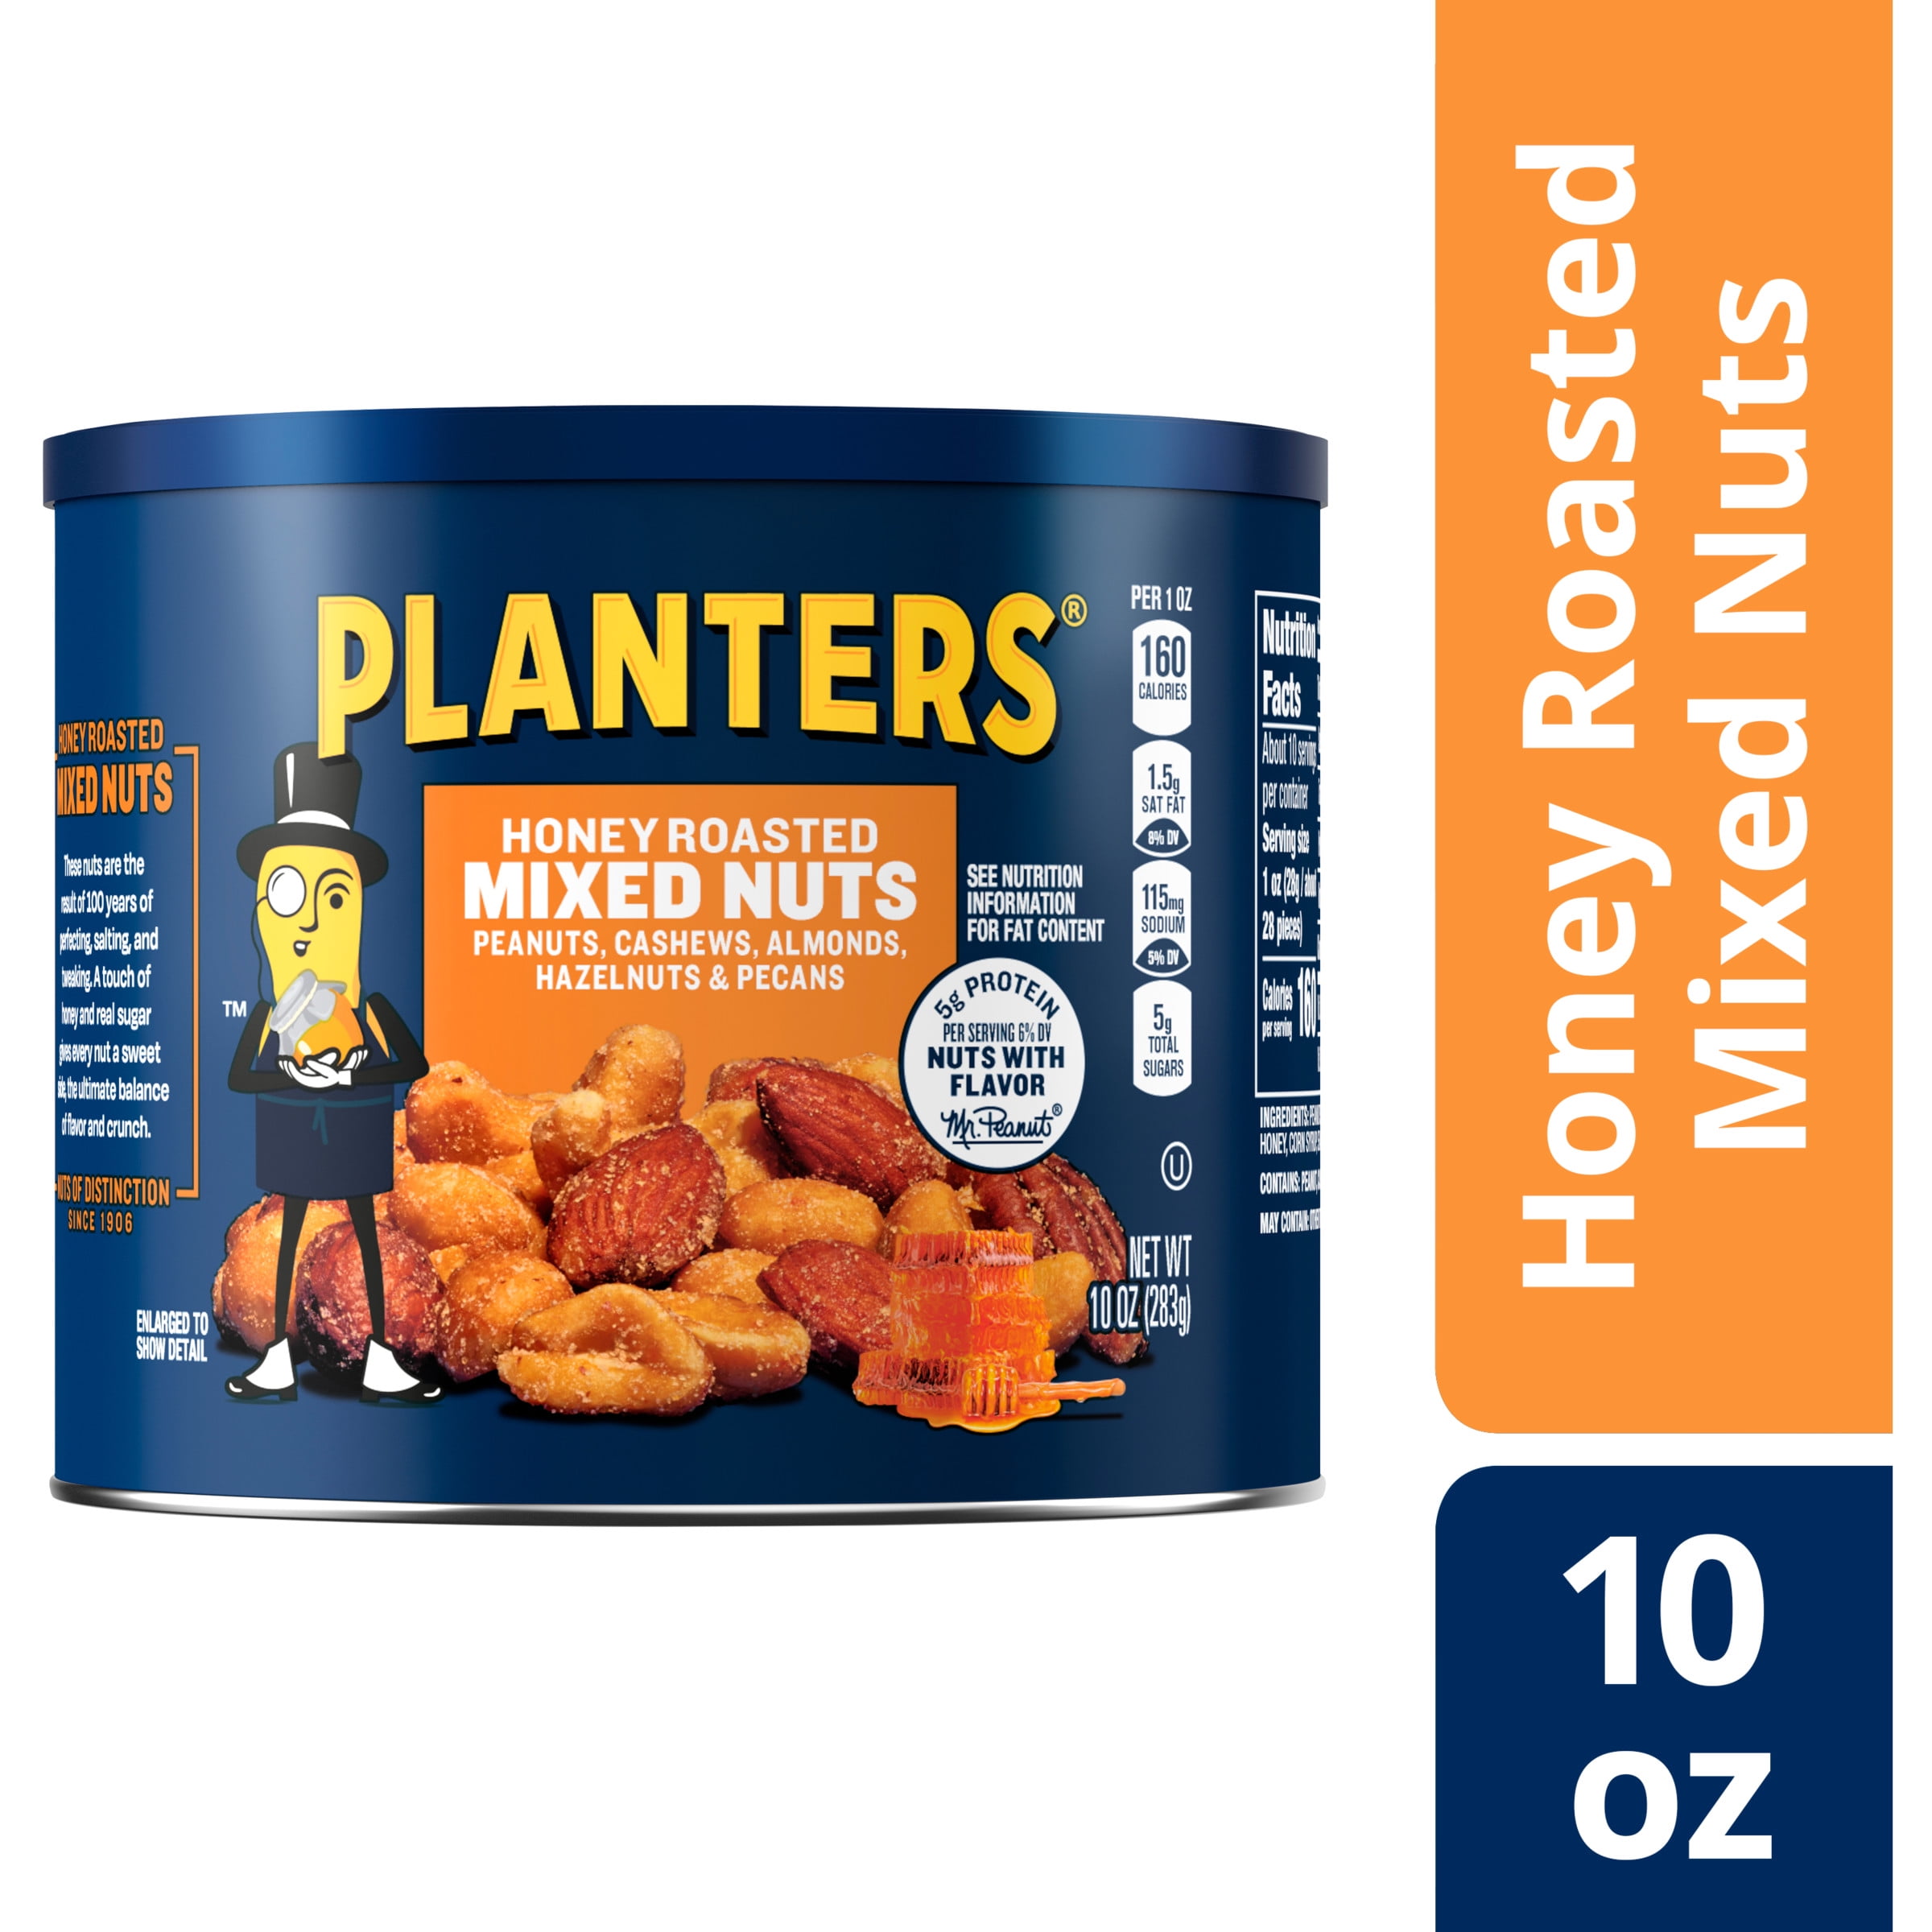 Black nuts / objects in Planters Honey Roasted mixed nuts : r/foodsafety